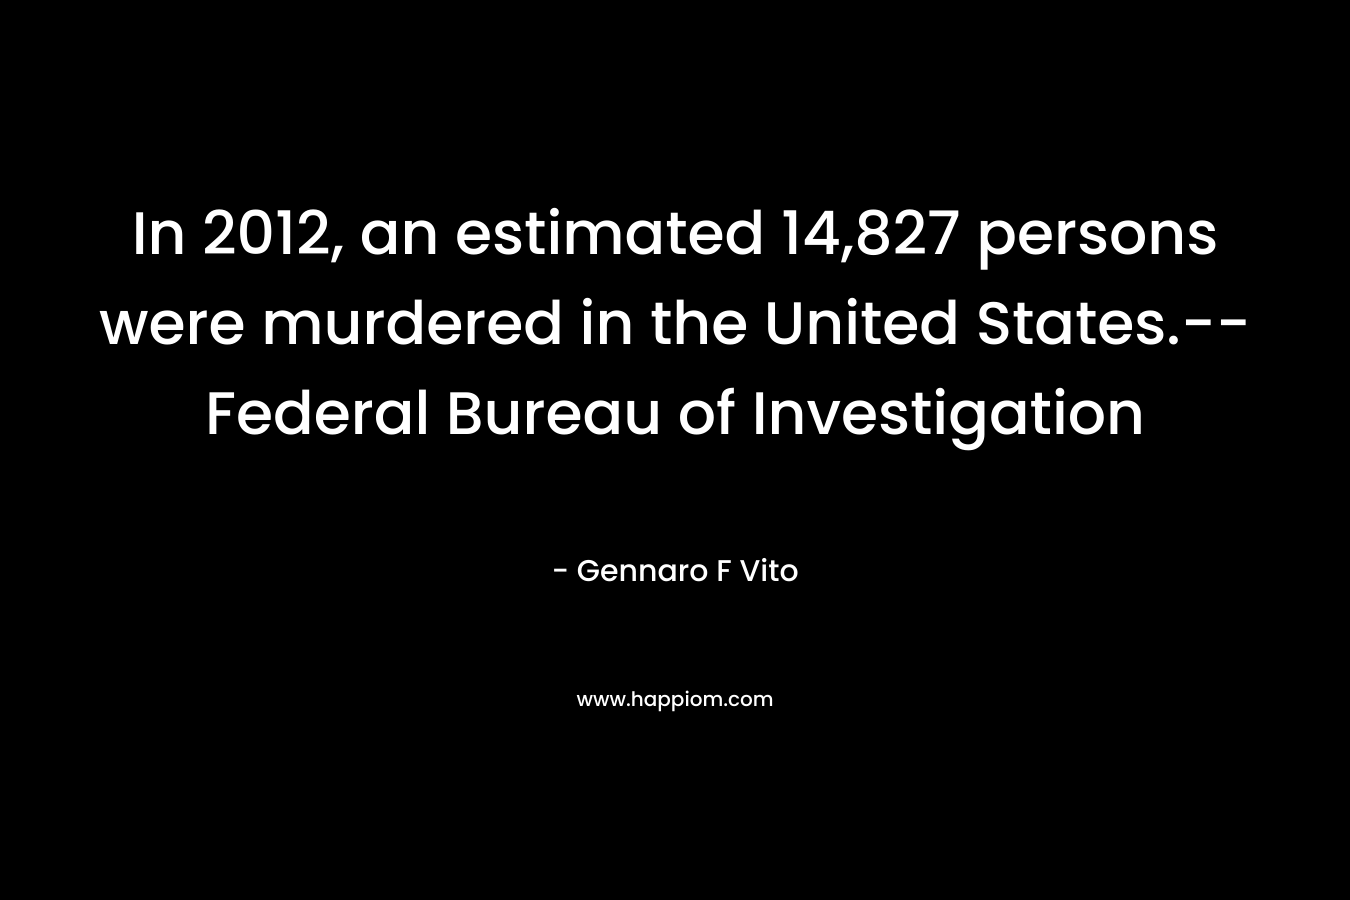 In 2012, an estimated 14,827 persons were murdered in the United States.-- Federal Bureau of Investigation